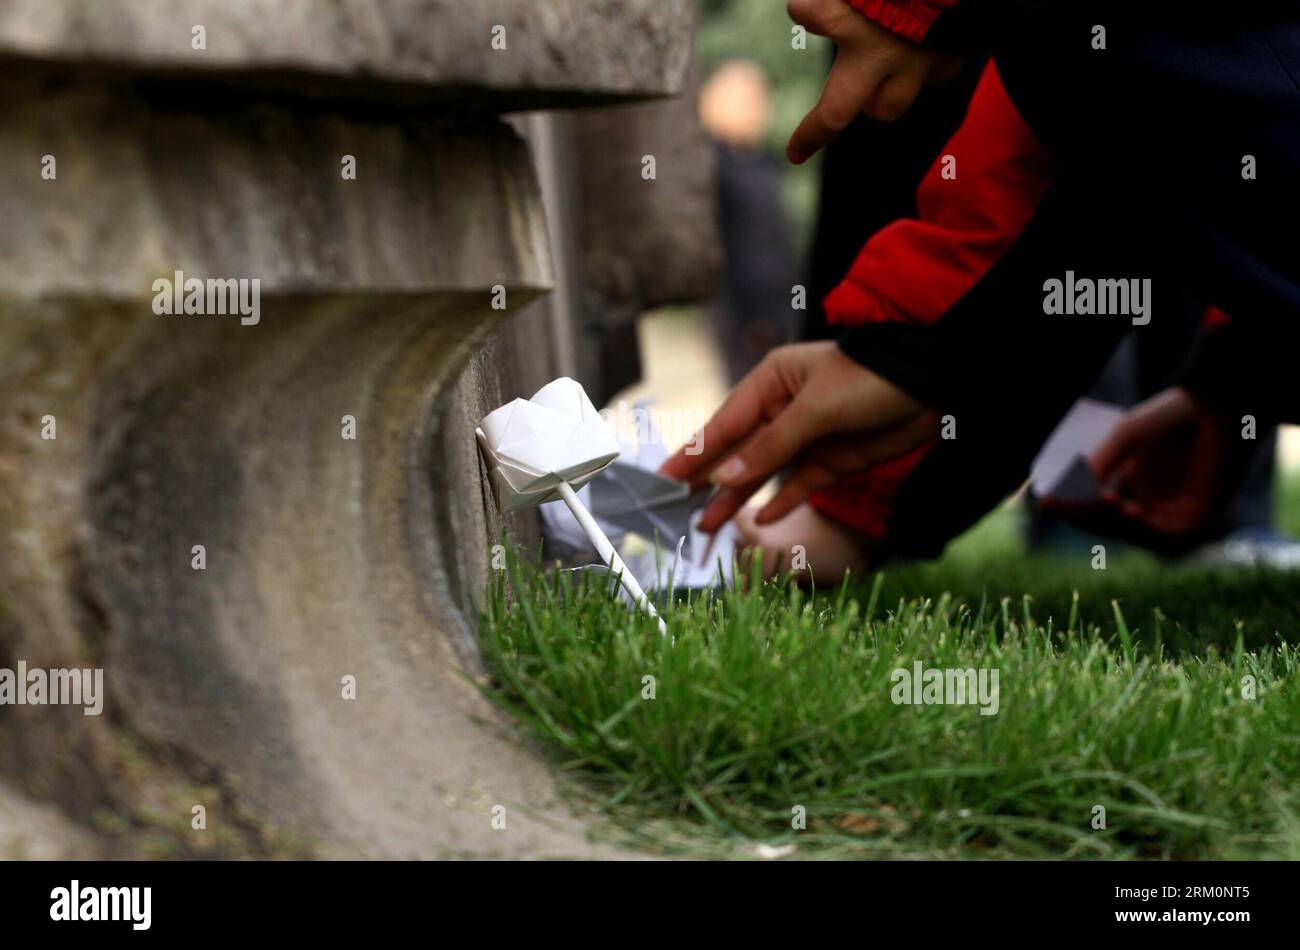 Bildnummer: 59460471  Datum: 30.03.2013  Copyright: imago/Xinhua Paper flowers and paper cranes are presented to a monument at Yuhuatai Martyr Cemetery in Nanjing, capital of east China s Jiangsu Province, March 30, 2013, to pay respect to martyrs ahead of the Qingming Festival, or Tomb Sweeping Day, which falls on April 4 this year. (Xinhua/Xu Yijia) (ry) CHINA-QINGMING FESTIVAL-MEMORIAL CEREMONIES (CN) PUBLICATIONxNOTxINxCHN Gesellschaft xas x2x 2013 quer Aufmacher premiumd o0 Friedhof Trauer Gedenken  Totenfest Totengedenken Blumen, Papierblumen Tradition     59460471 Date 30 03 2013 Copyri Stock Photo